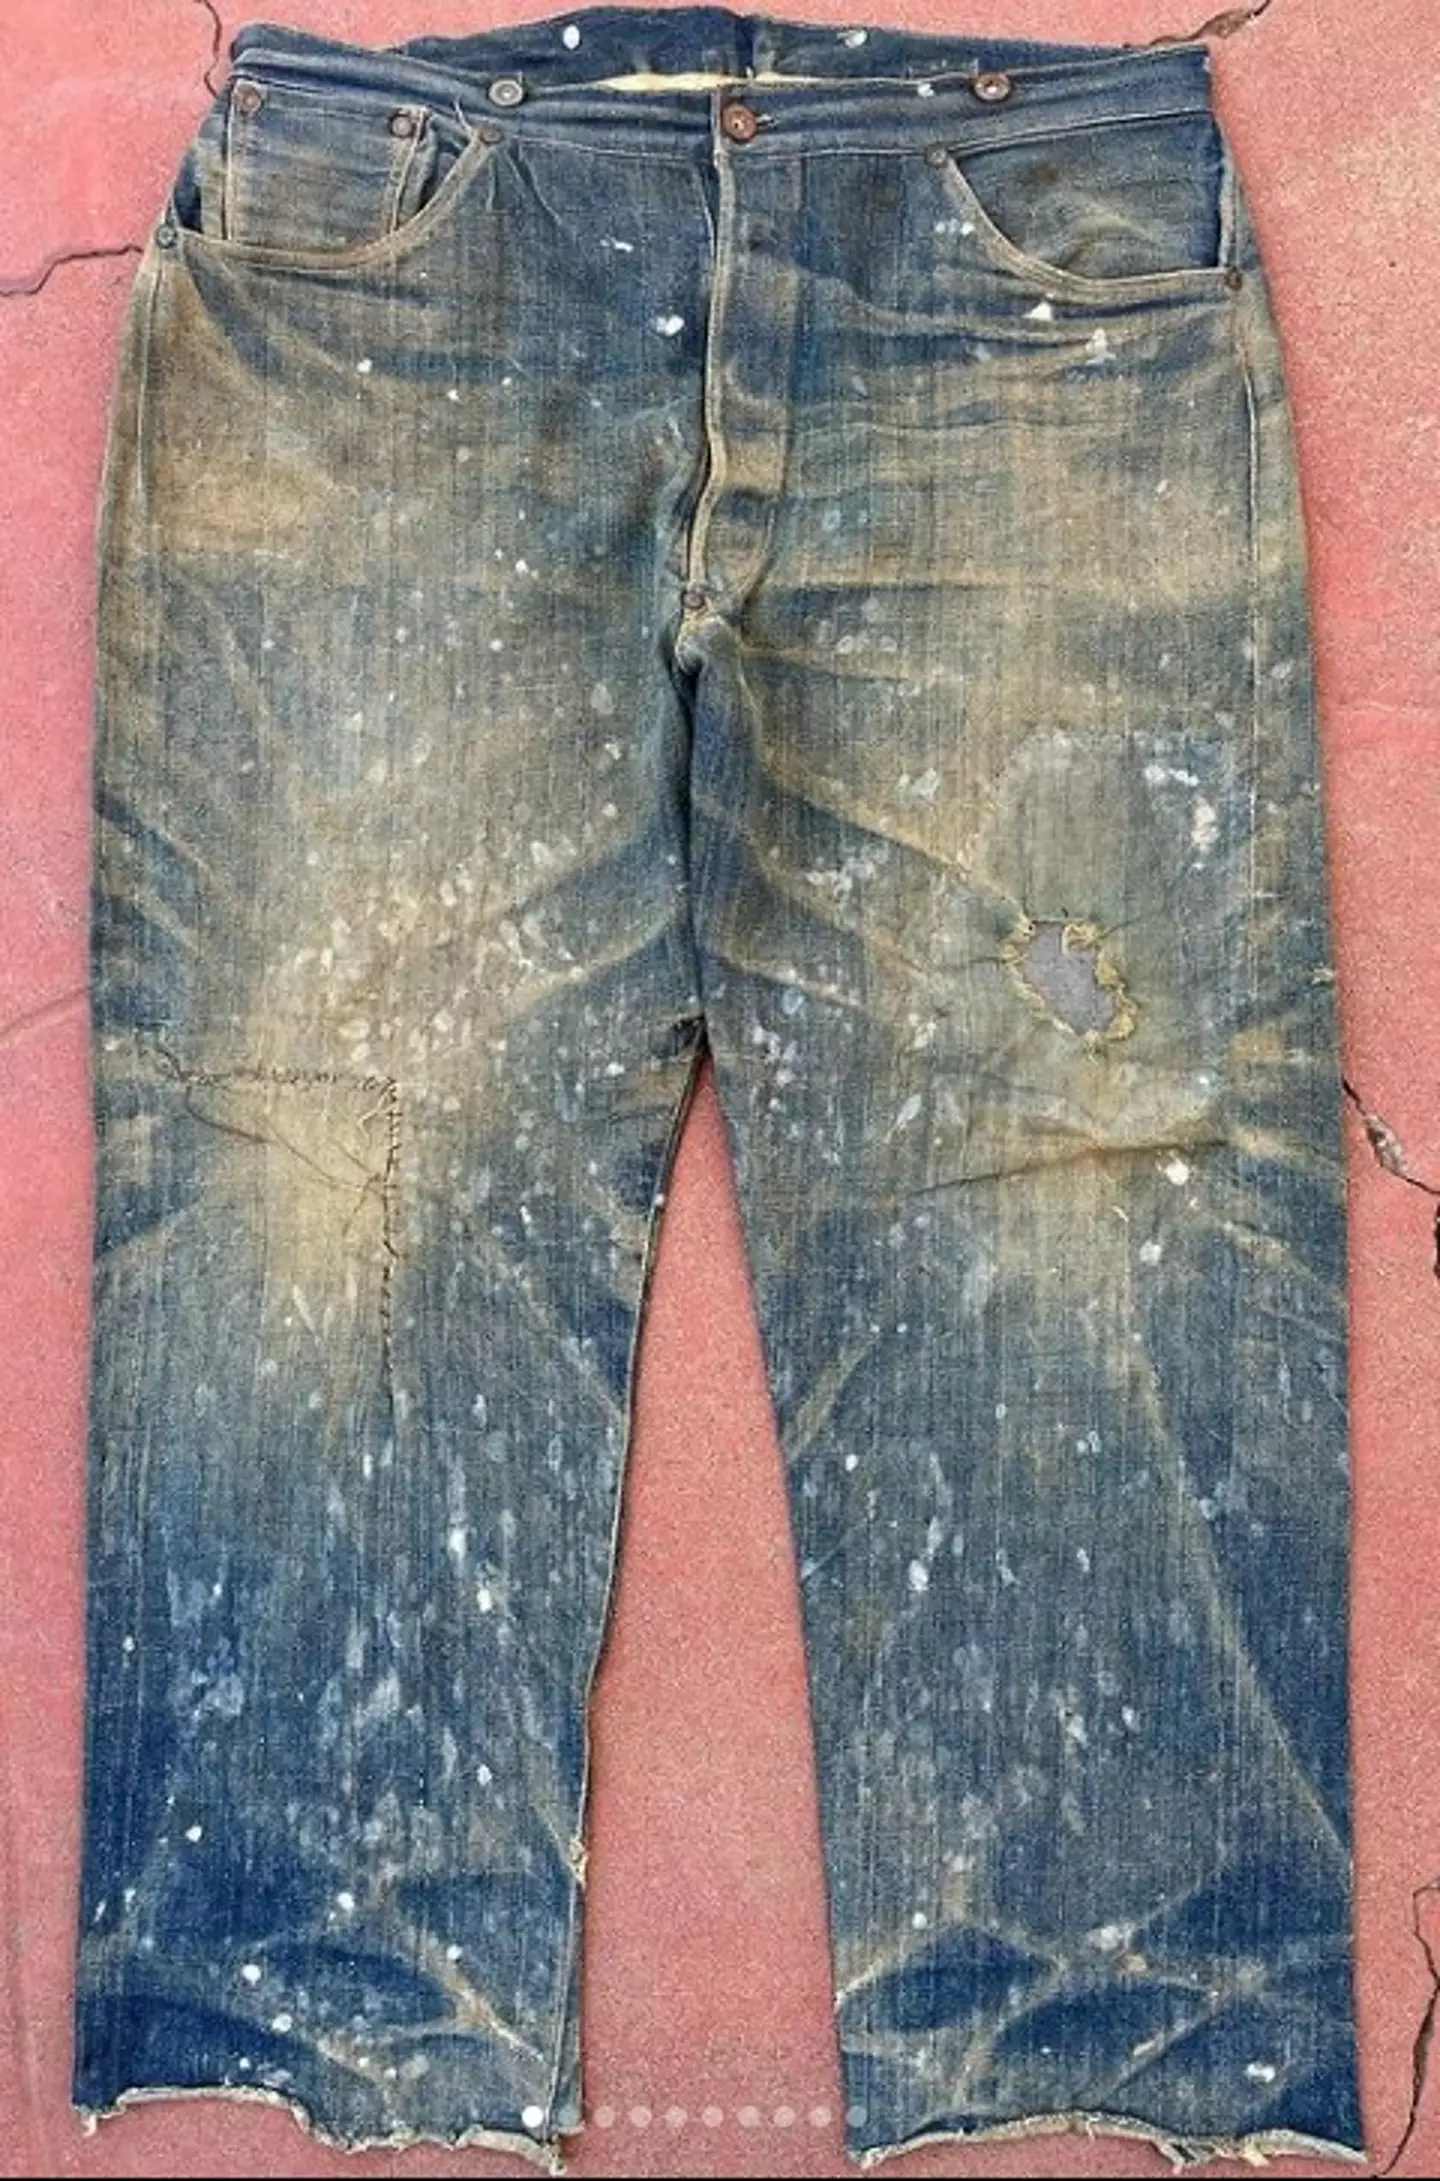 The jeans were marked with candle wax.